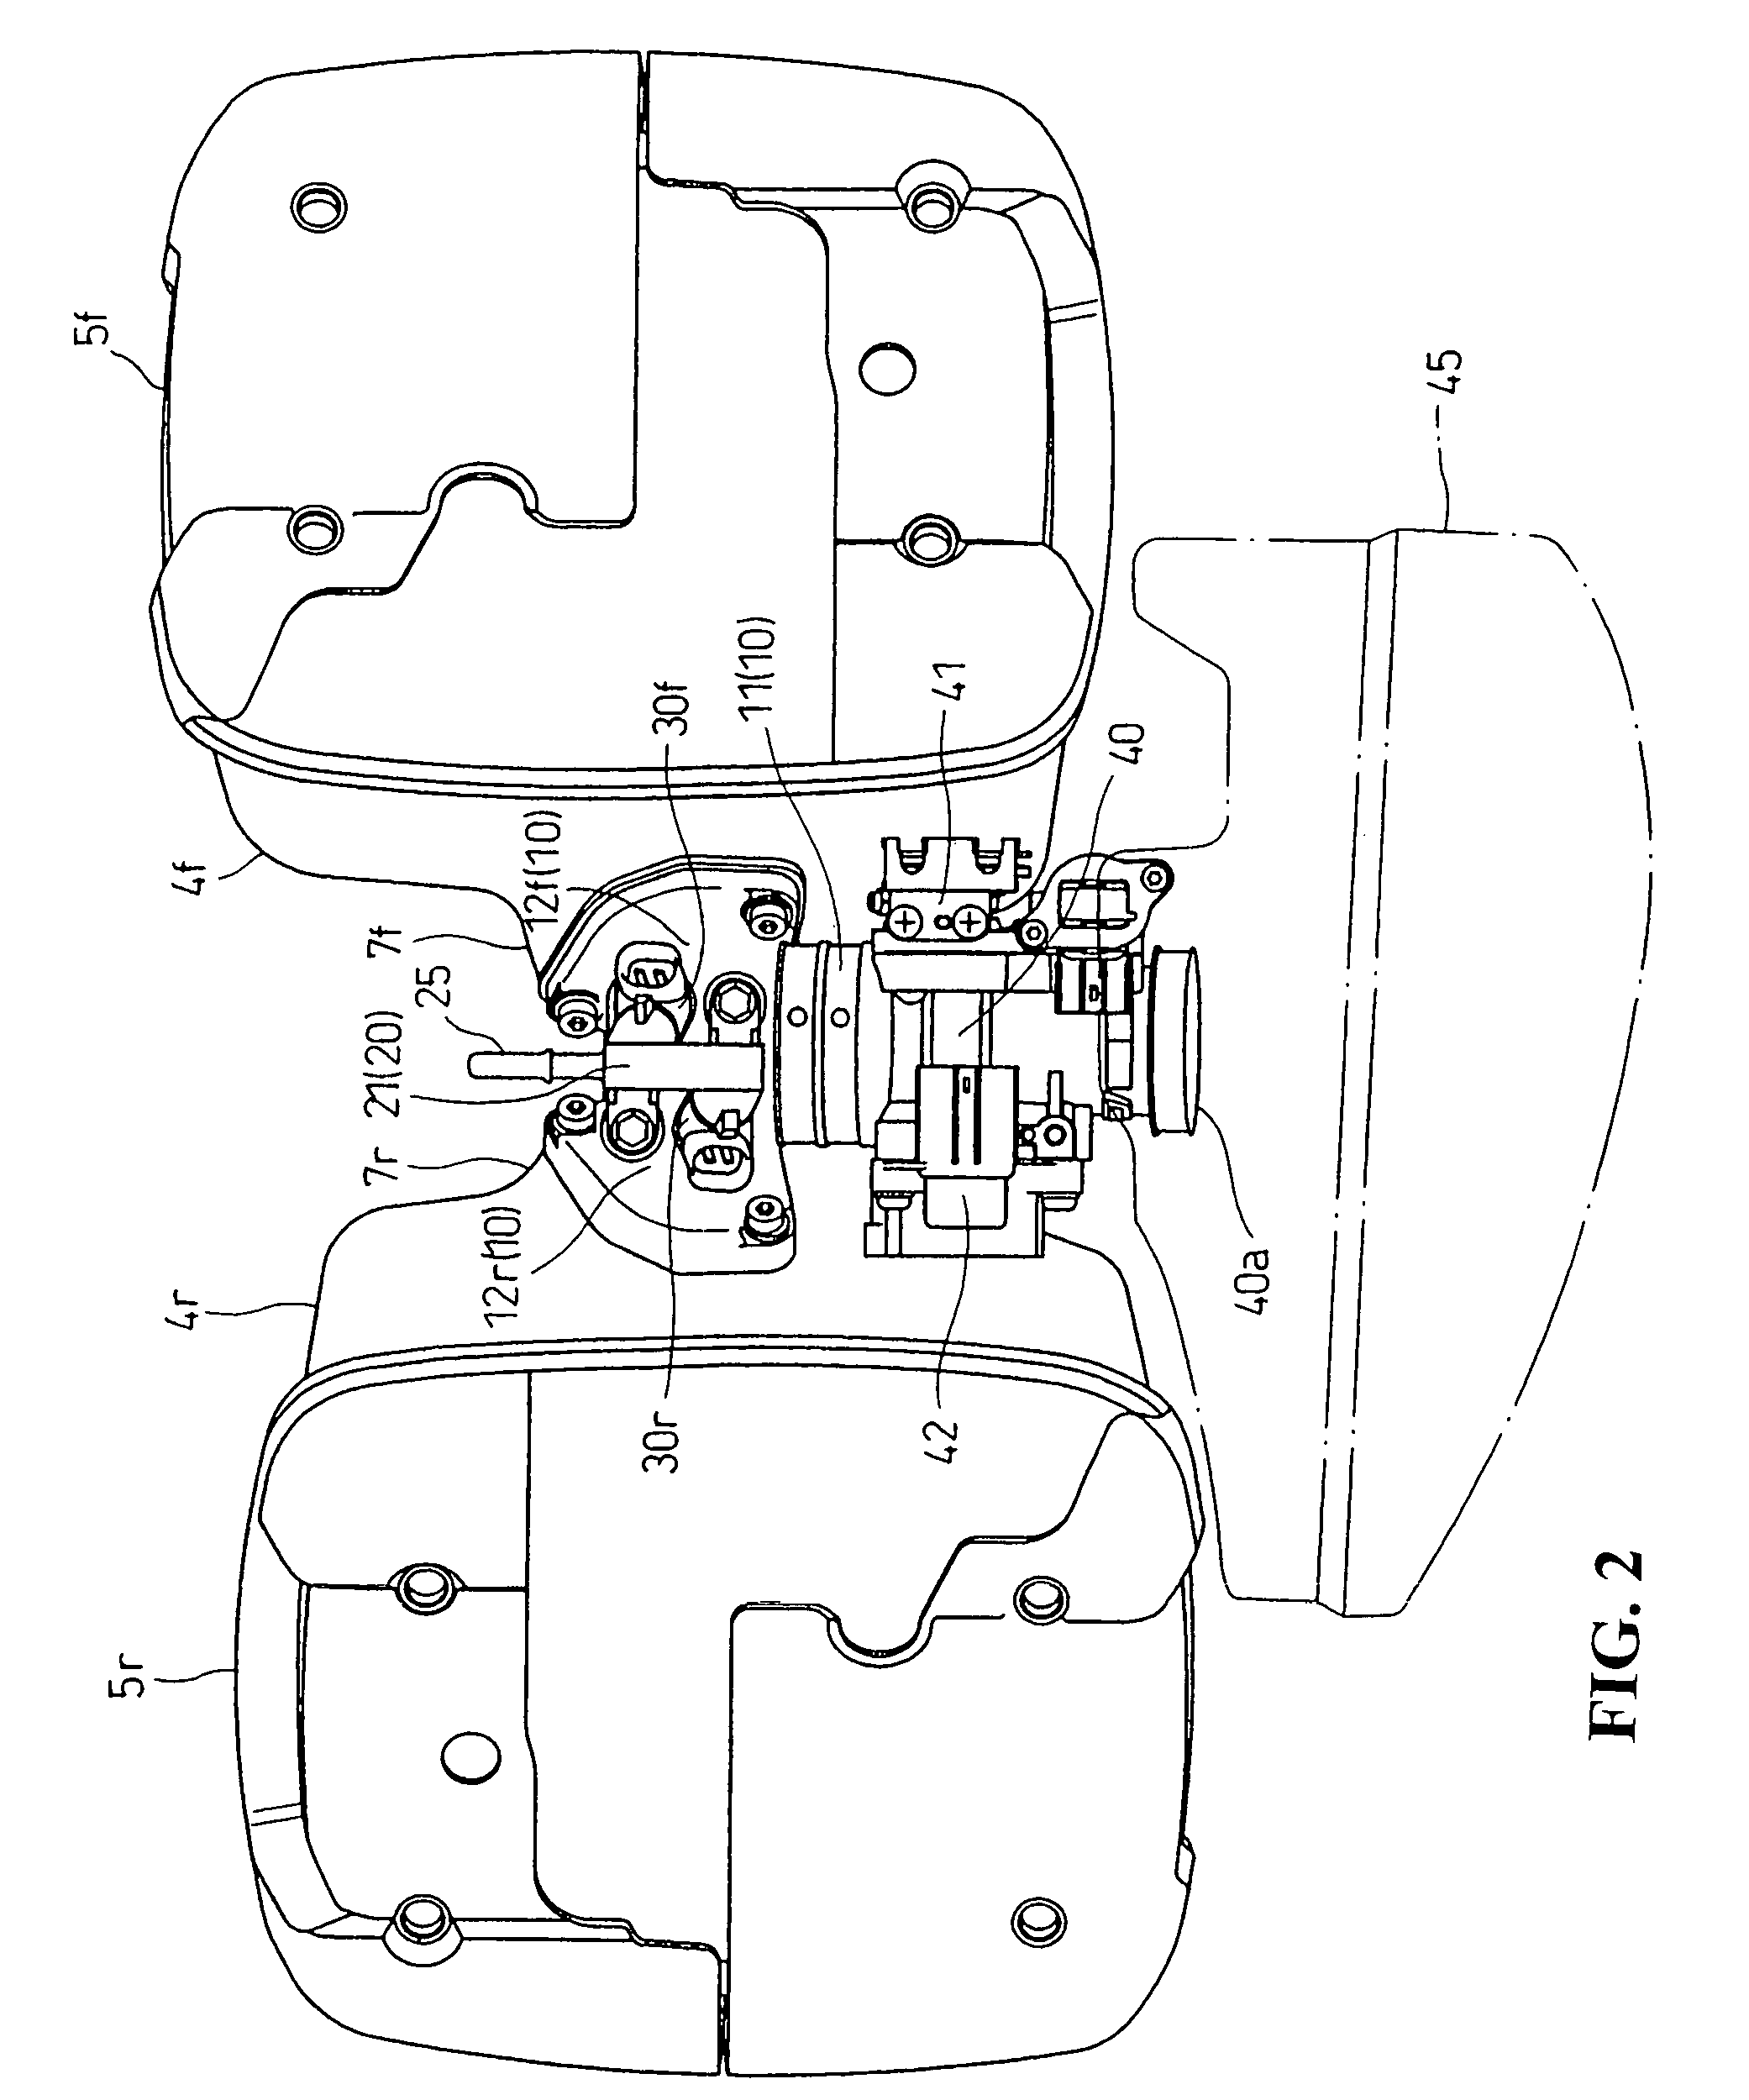 Injector mounting structure of V-type internal combustion engine